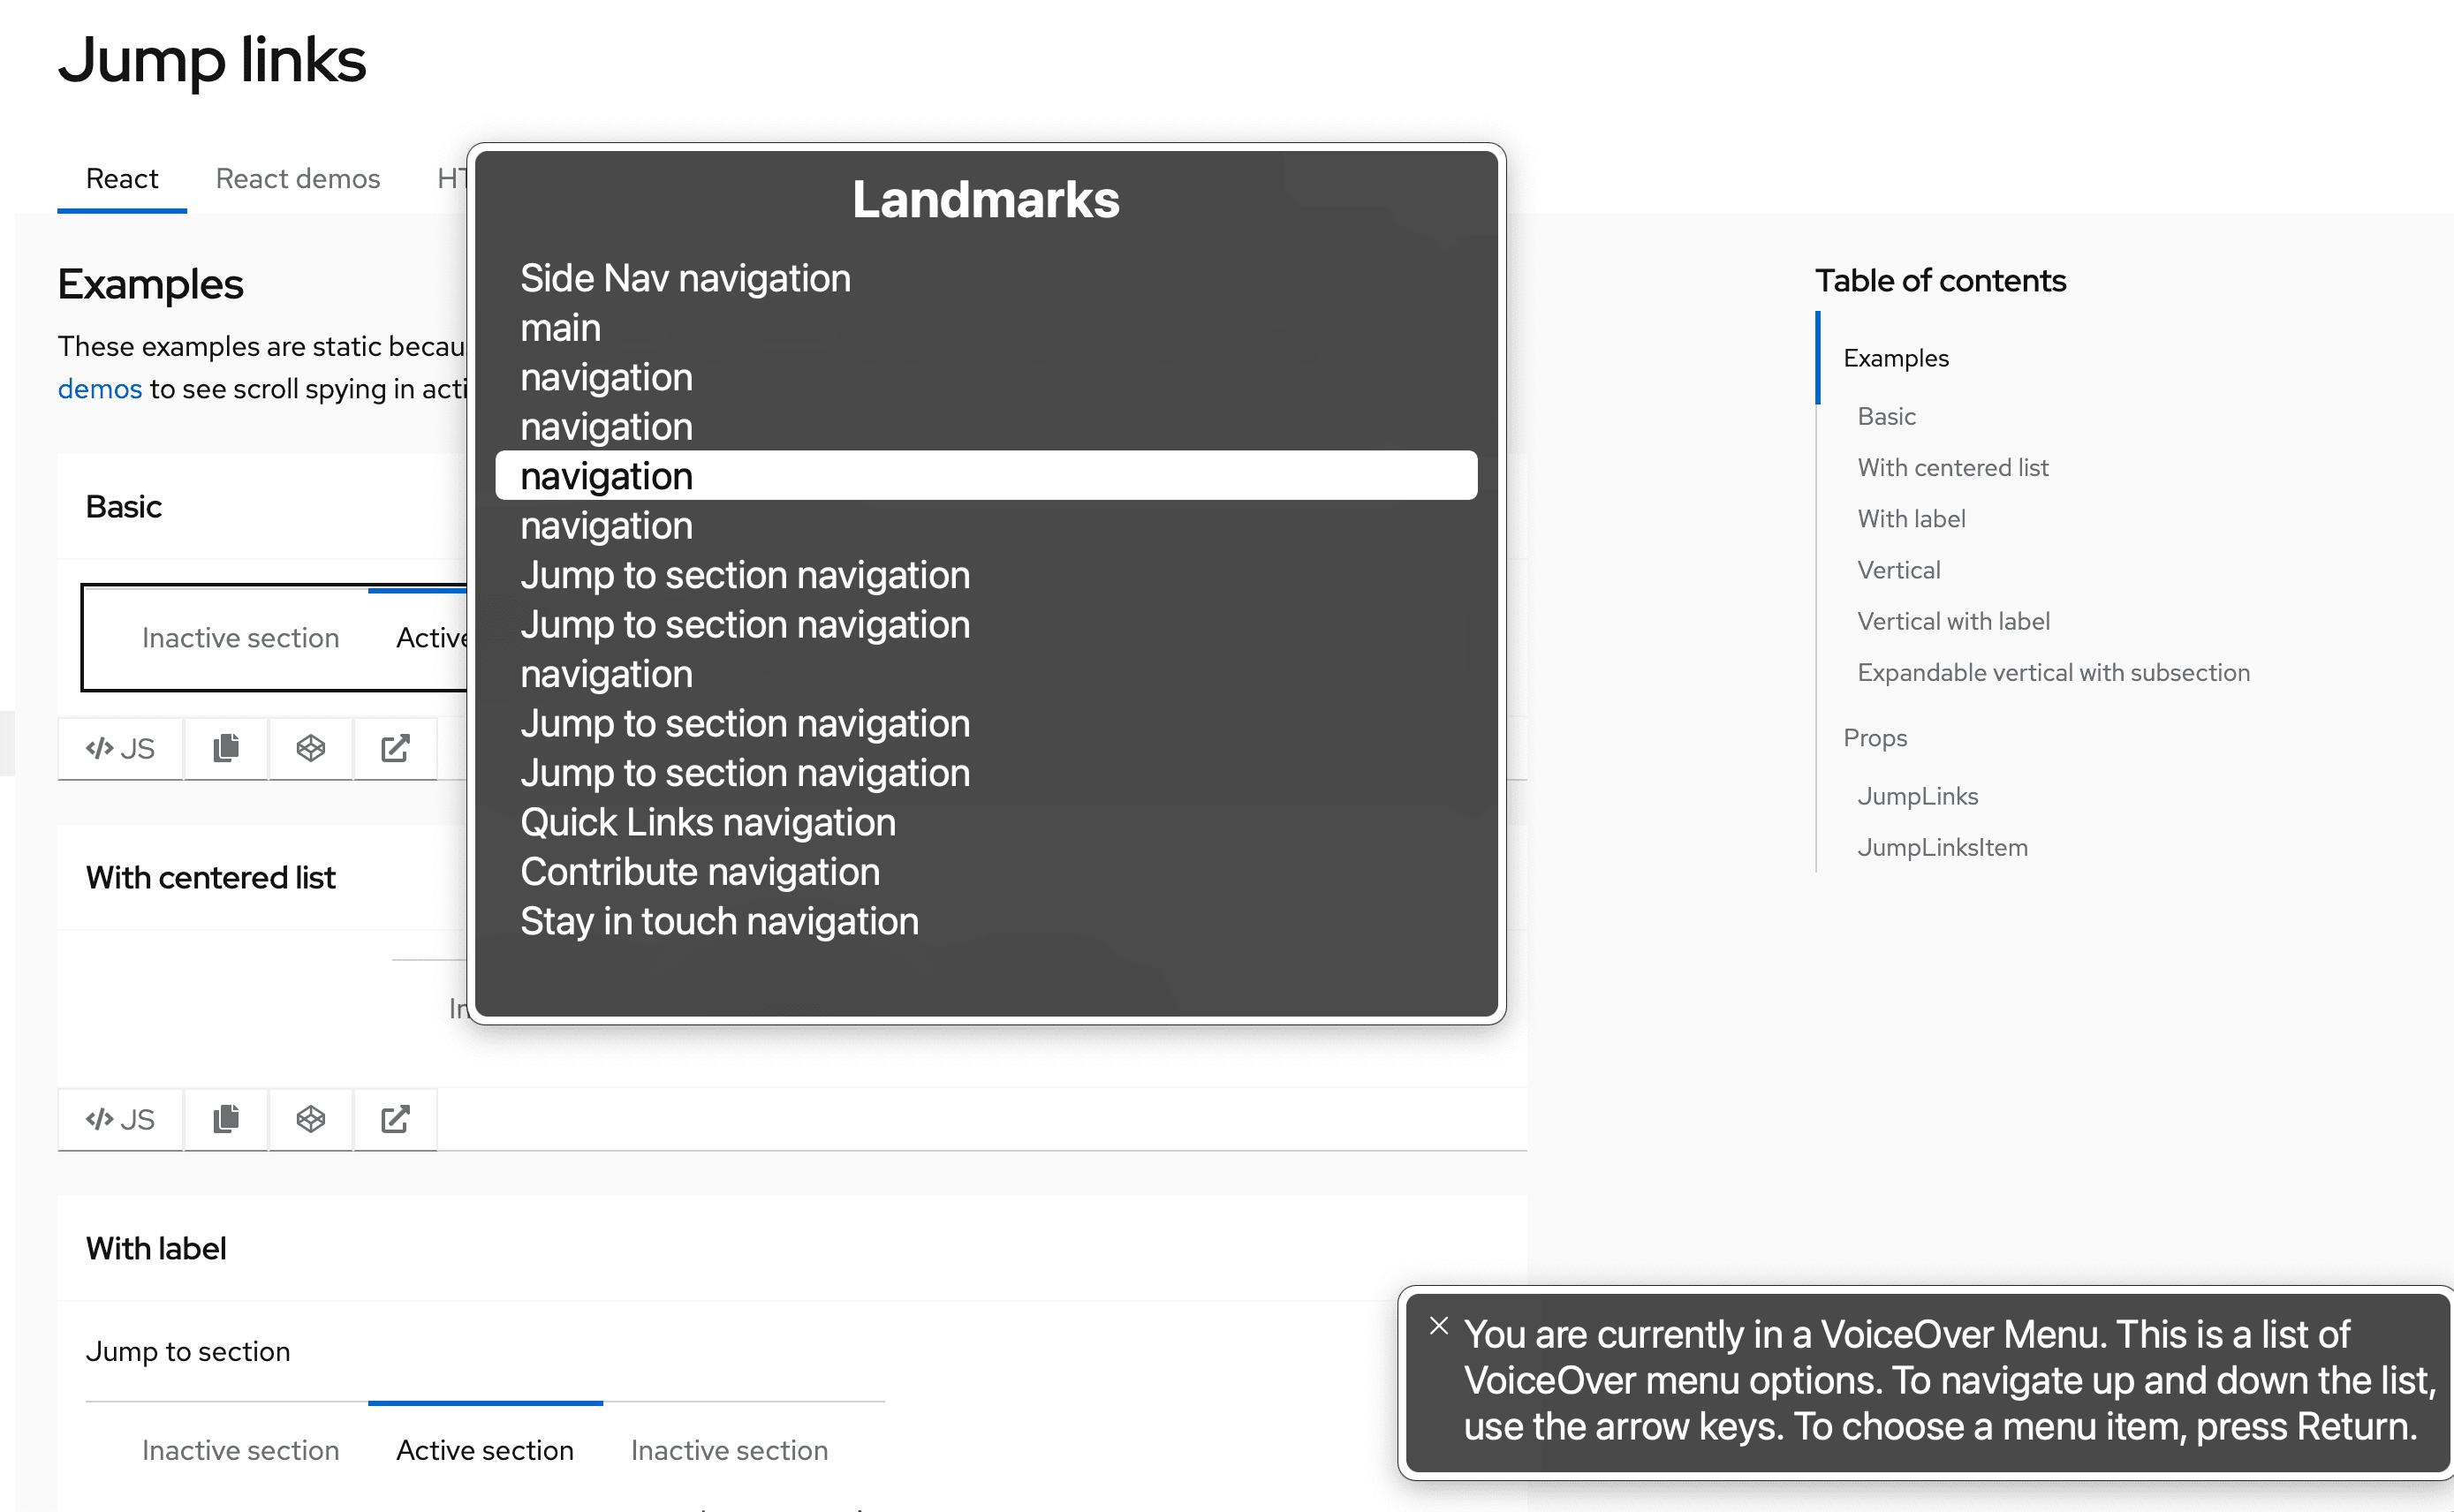 An example of VoiceOver's rotor menu interface which demonstrates that each navigation element is indistinguishable from the others without aria-labels.